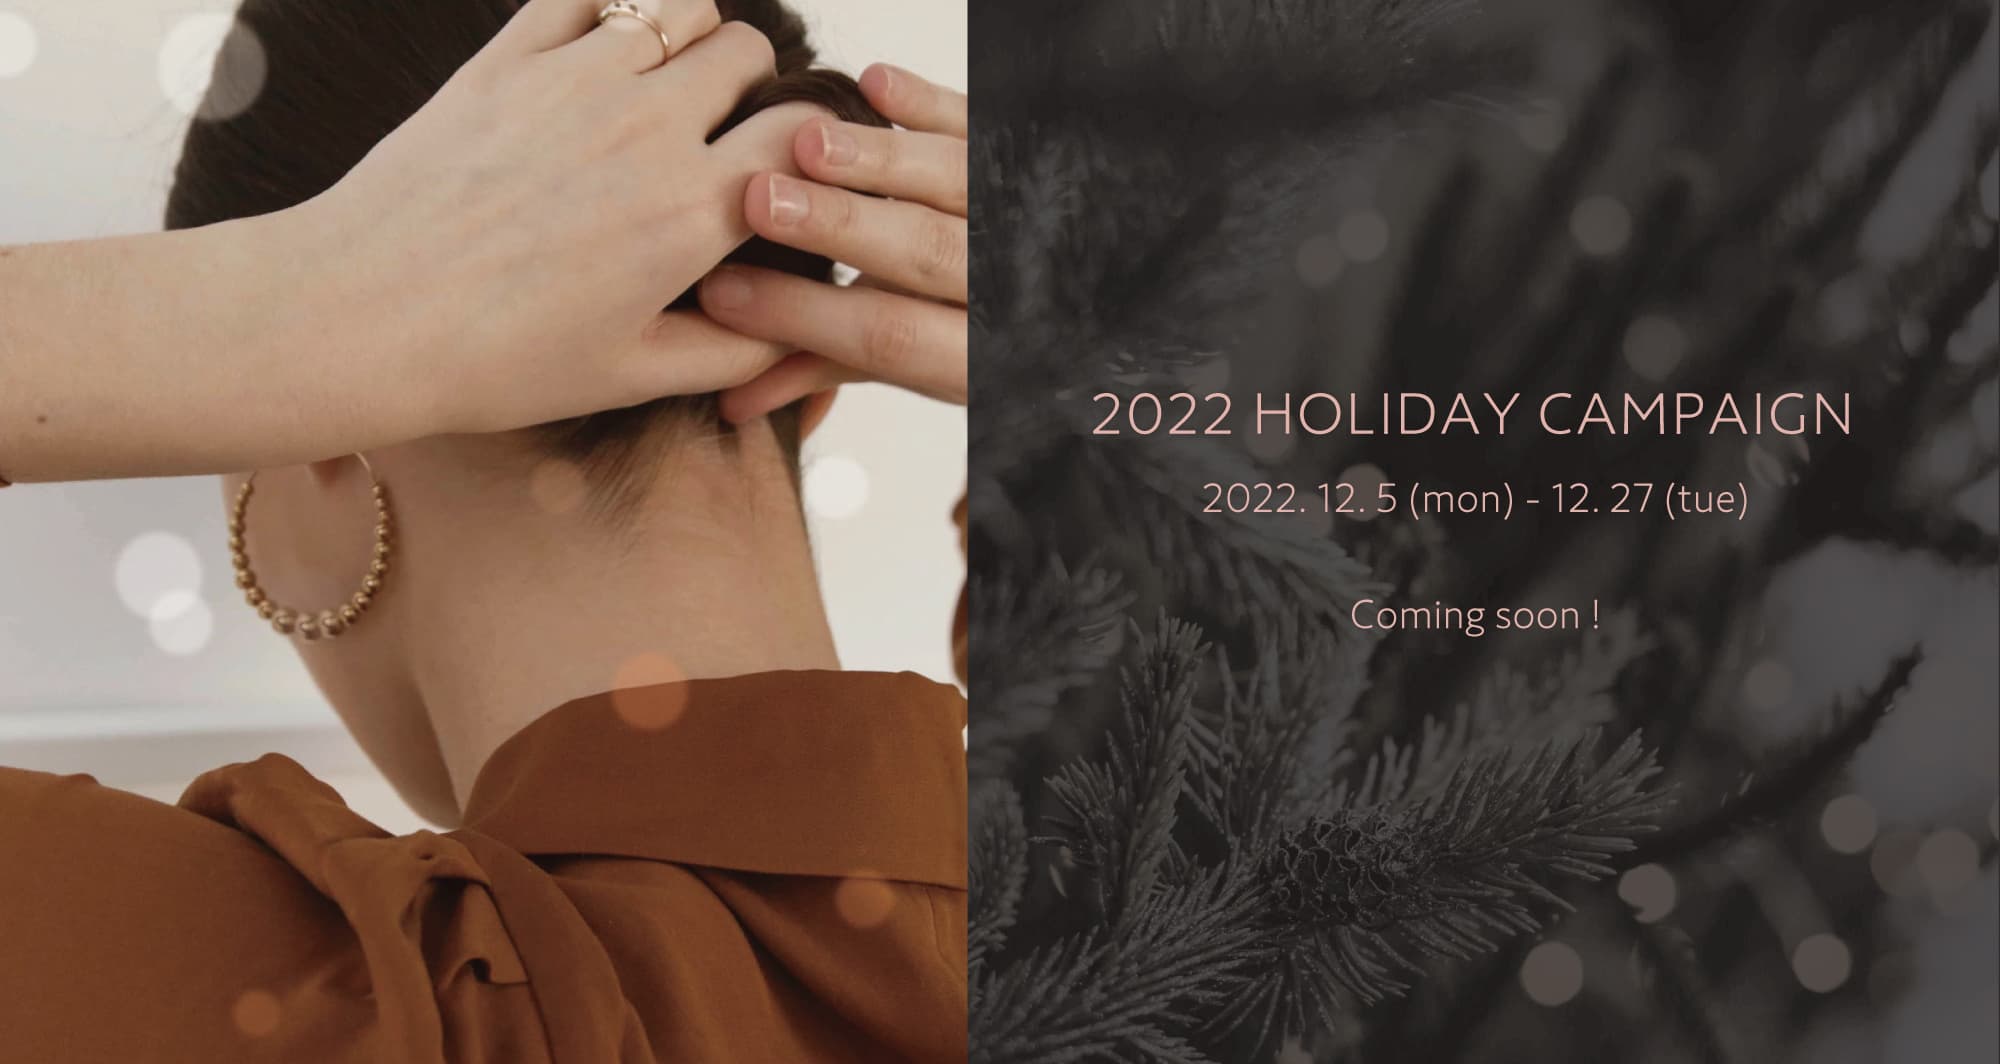 2022 HOLIDAY CAMPAIGN